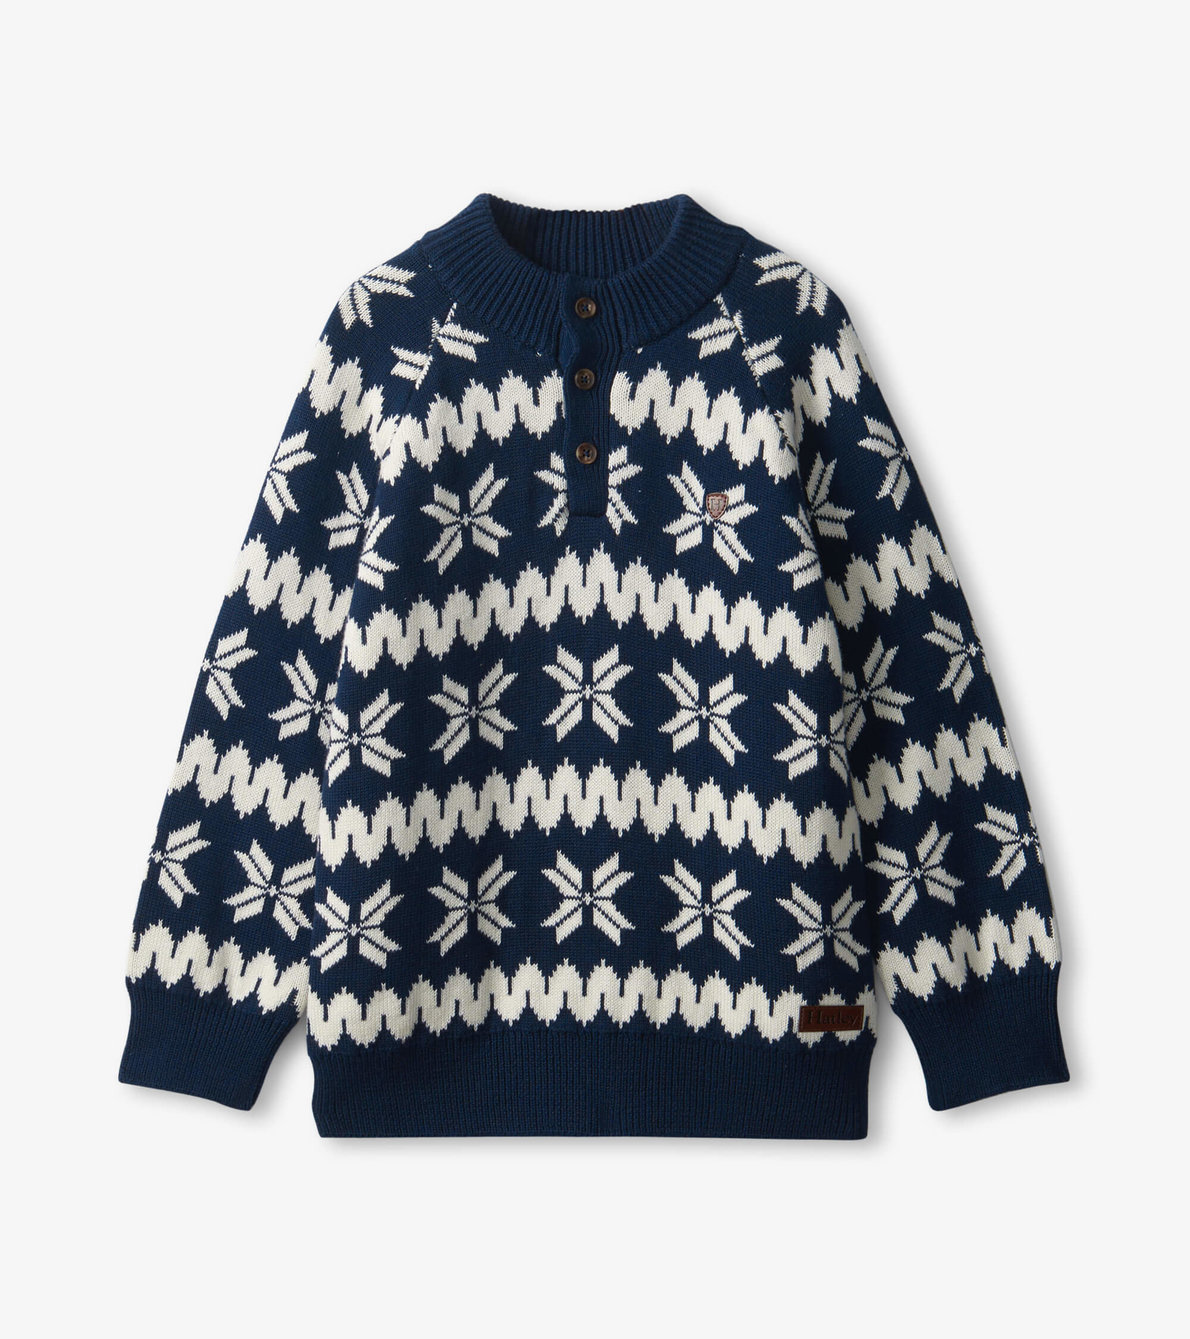 View larger image of Boys Winter Knit Mock Neck Sweater